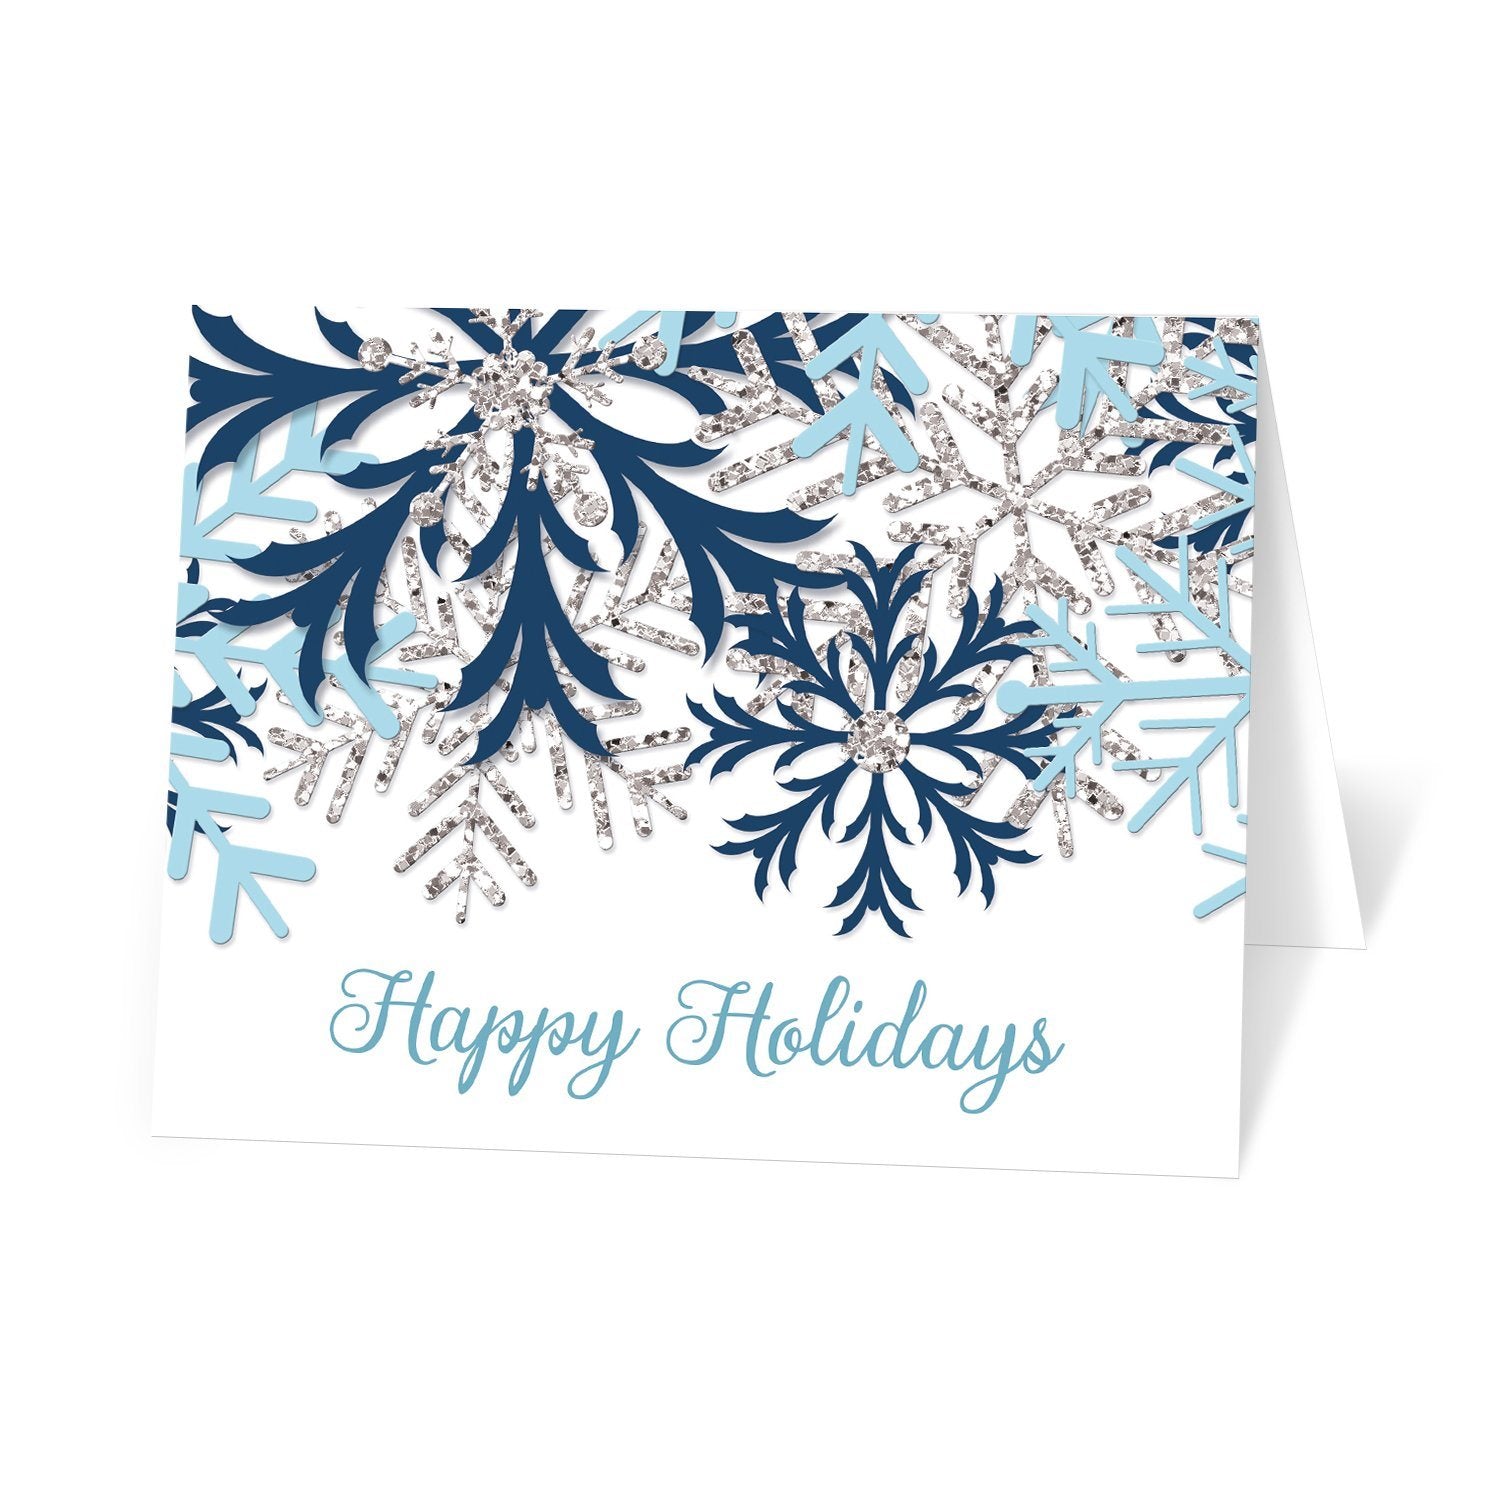 Winter Blue Silver Snowflake Holiday Cards at Artistically Invited. Modern Winter blue Holiday cards designed with navy blue, aqua blue, and silver glitter-illustrated snowflakes over a white background. 'Happy Holidays' is printed in a whimsical blue script font over the white below the snowflakes. This frosty two-tone blue snowflake design is perfect for your Christmas Holiday greetings.